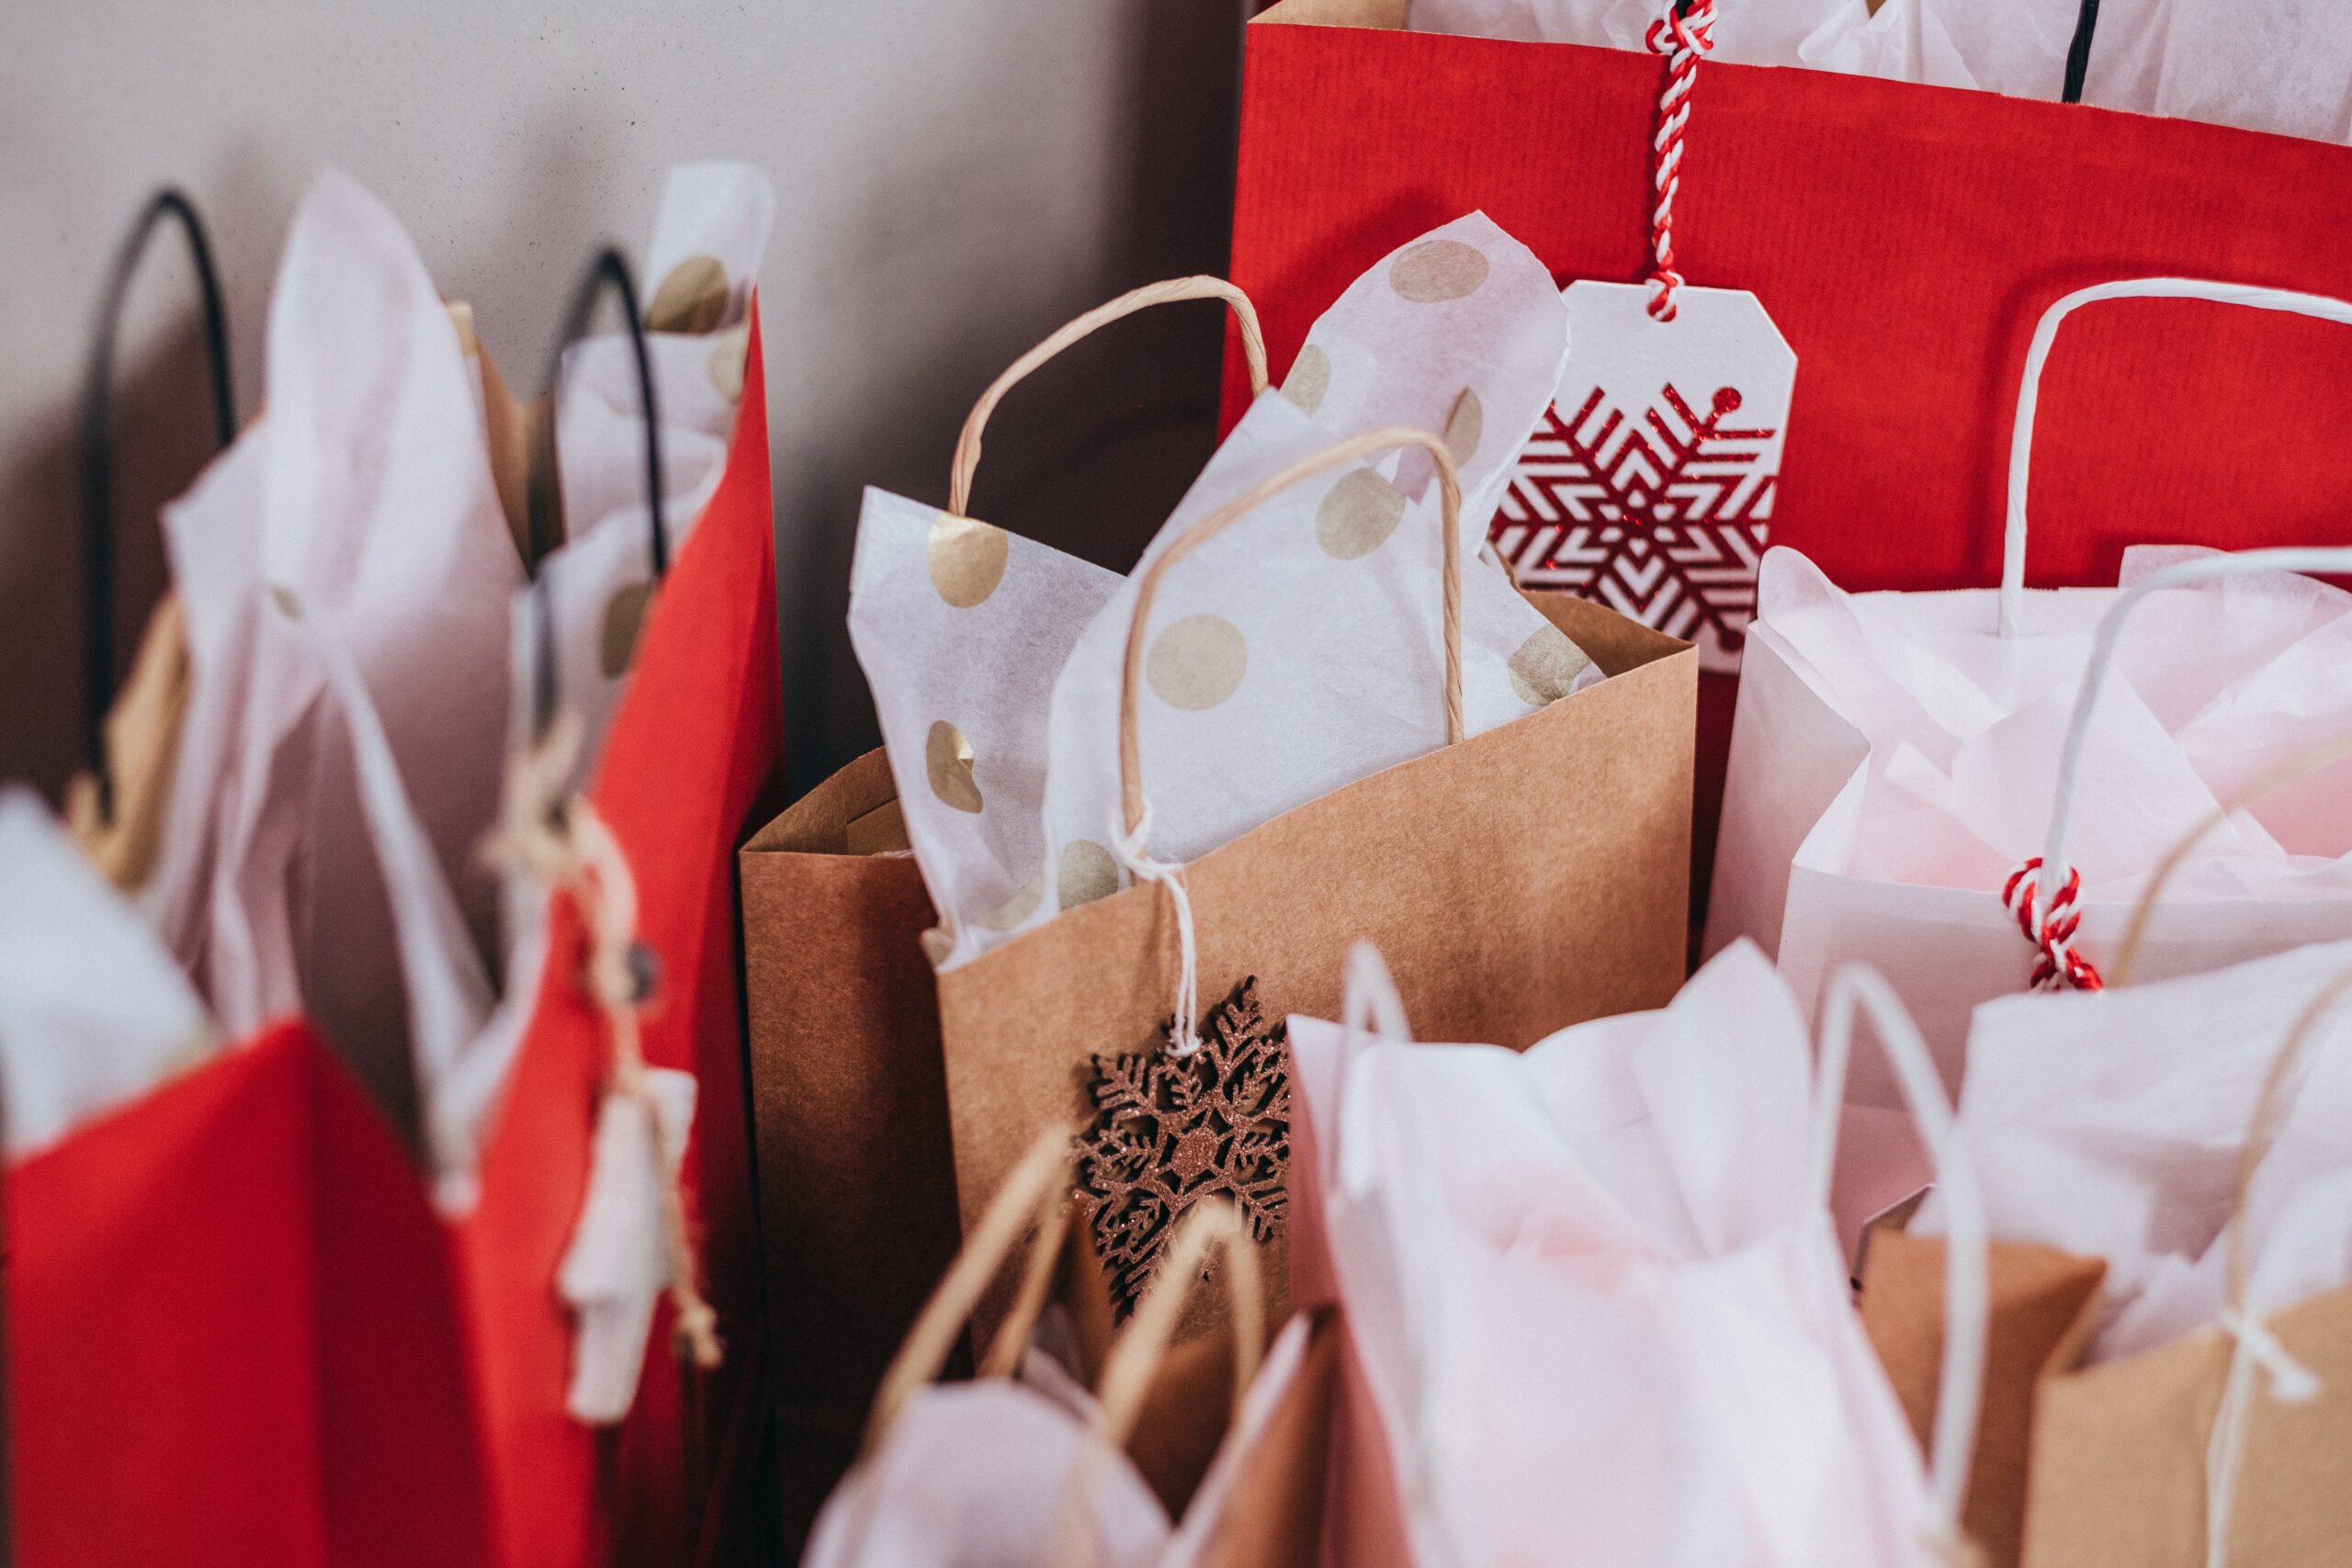 A bunch of gift bags in red and brown, with white and gold tissue paper peeking out from each. The bags also feature glittery snowflake tags, tied with red and white string